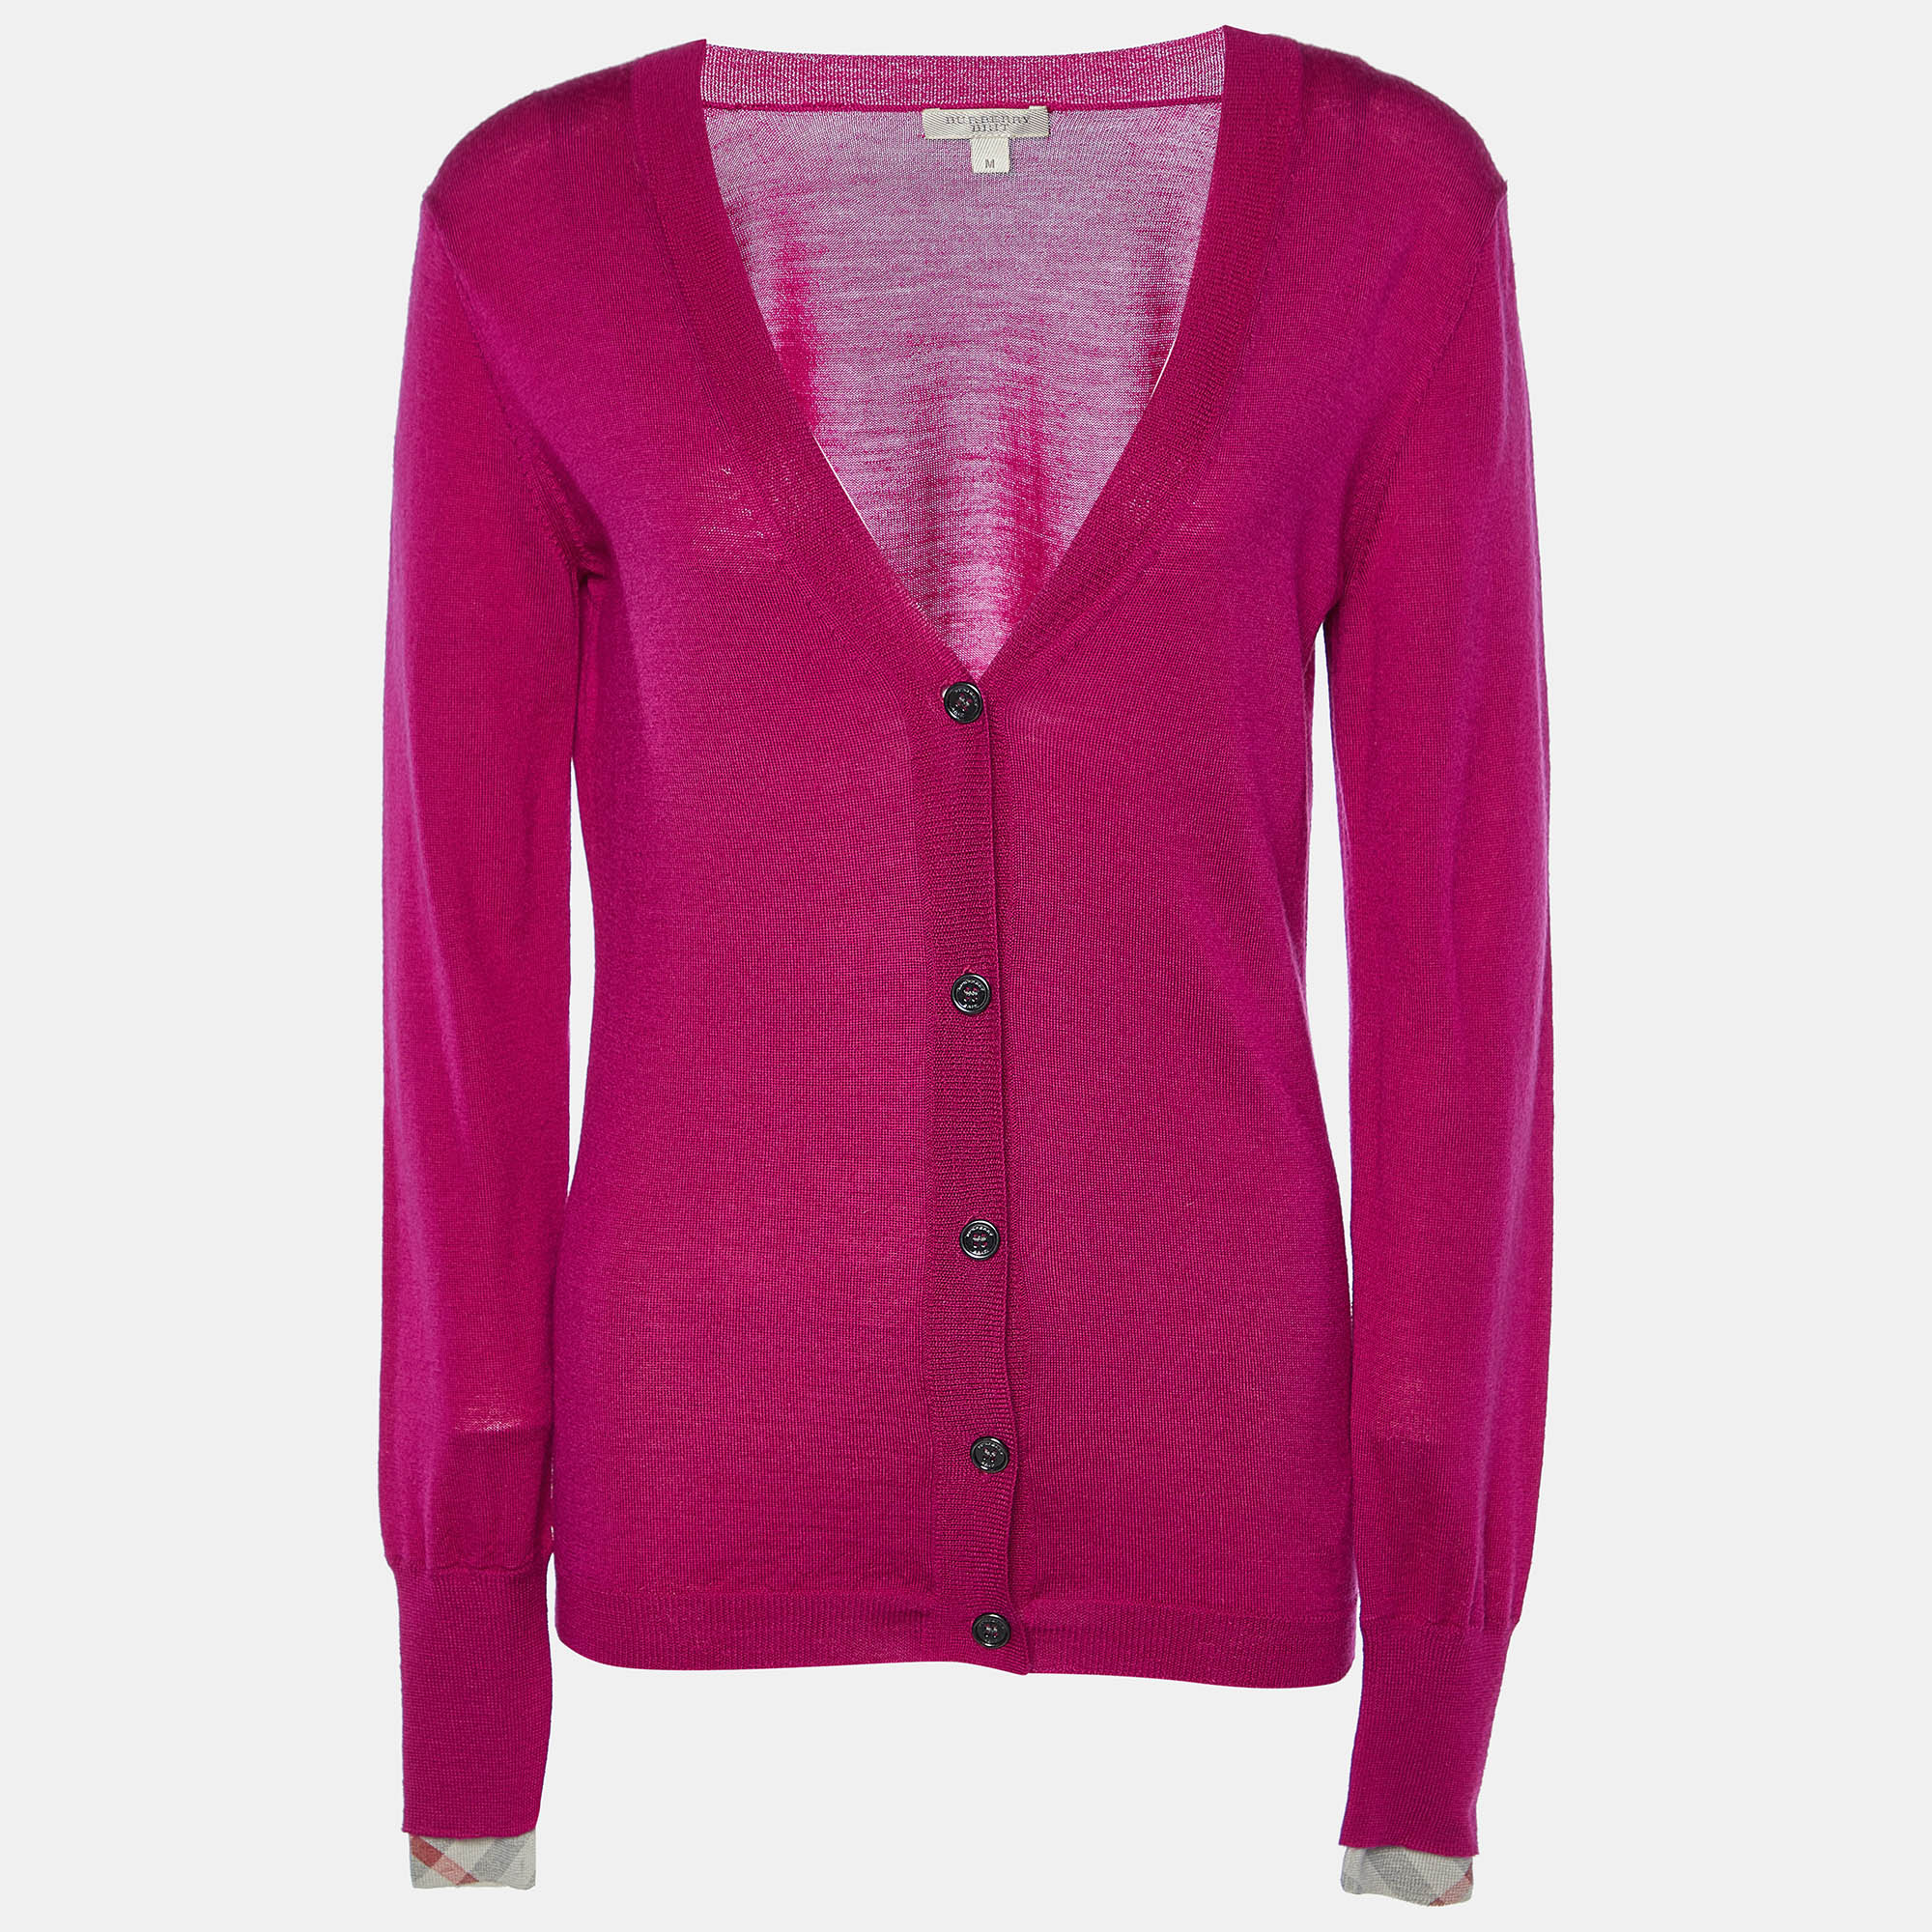 

Burberry Brit Pink Merino Wool Knit Button Front Cardigan